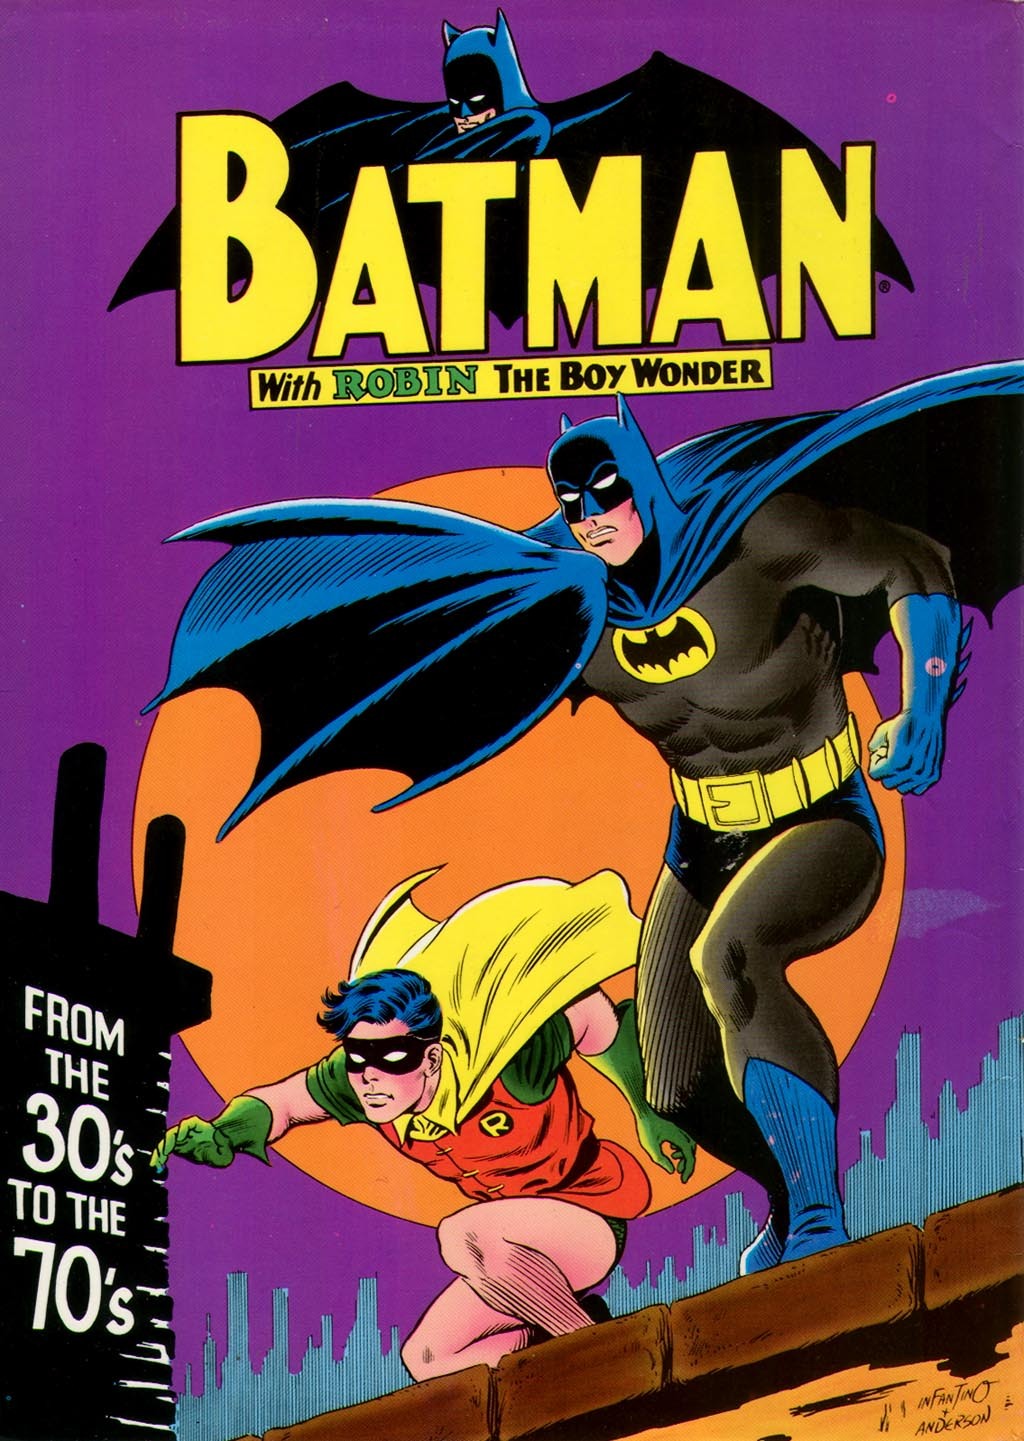 BHOC: BATMAN FROM THE '30s TO THE '70s – The Tom Brevoort Experience